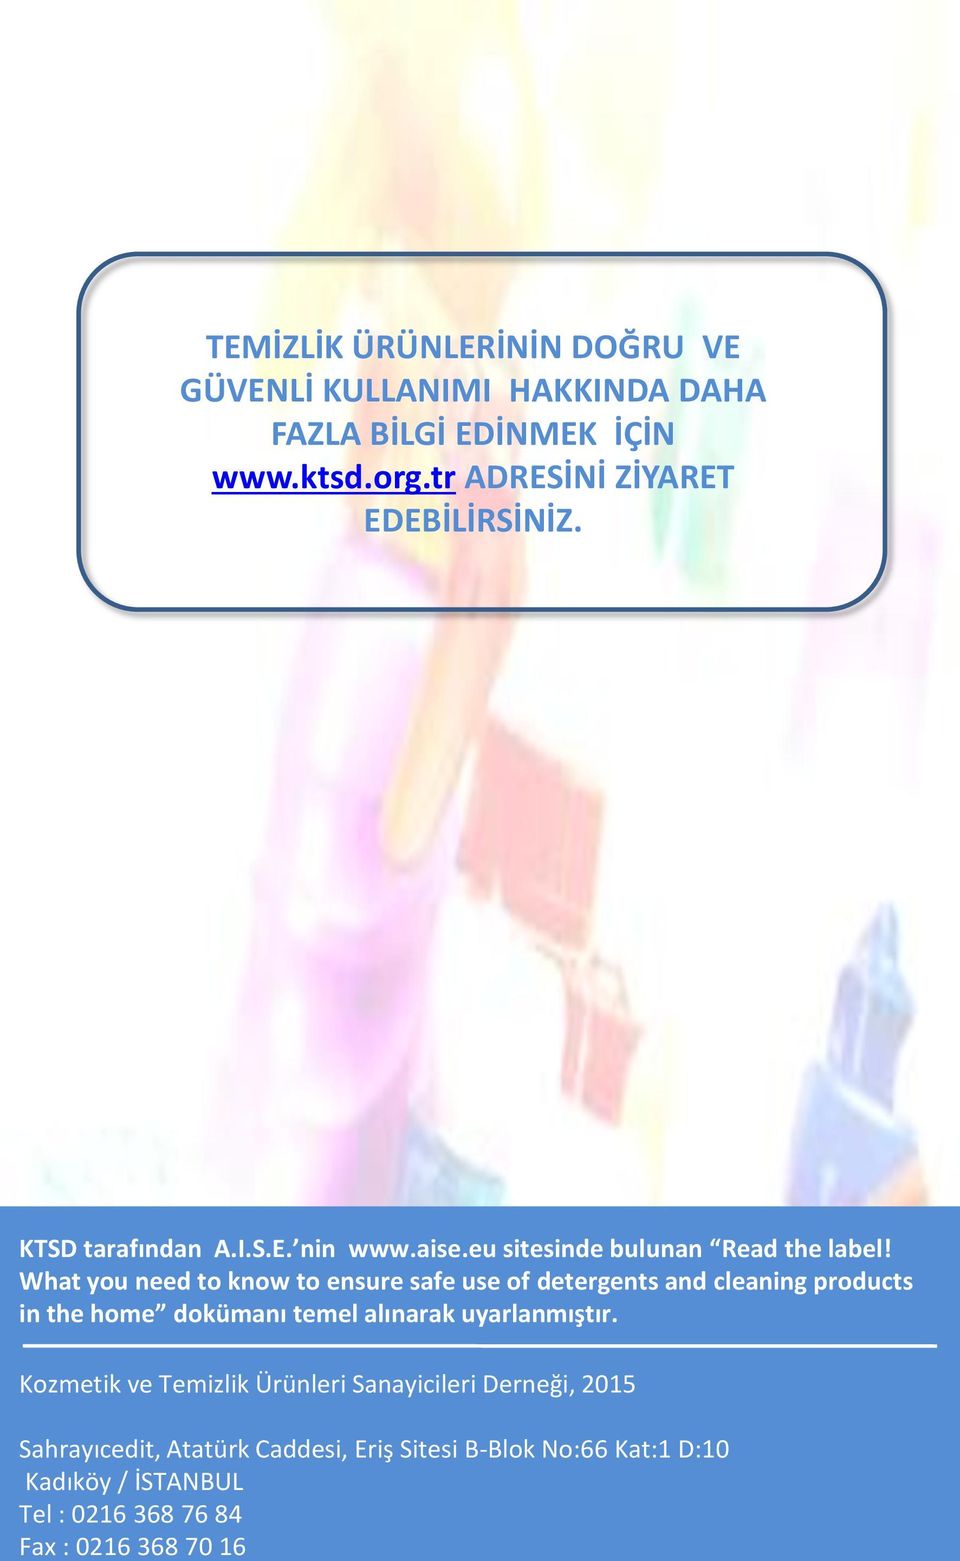 What you need to know to ensure safe use of detergents and cleaning products in the home dokümanı temel alınarak uyarlanmıştır.